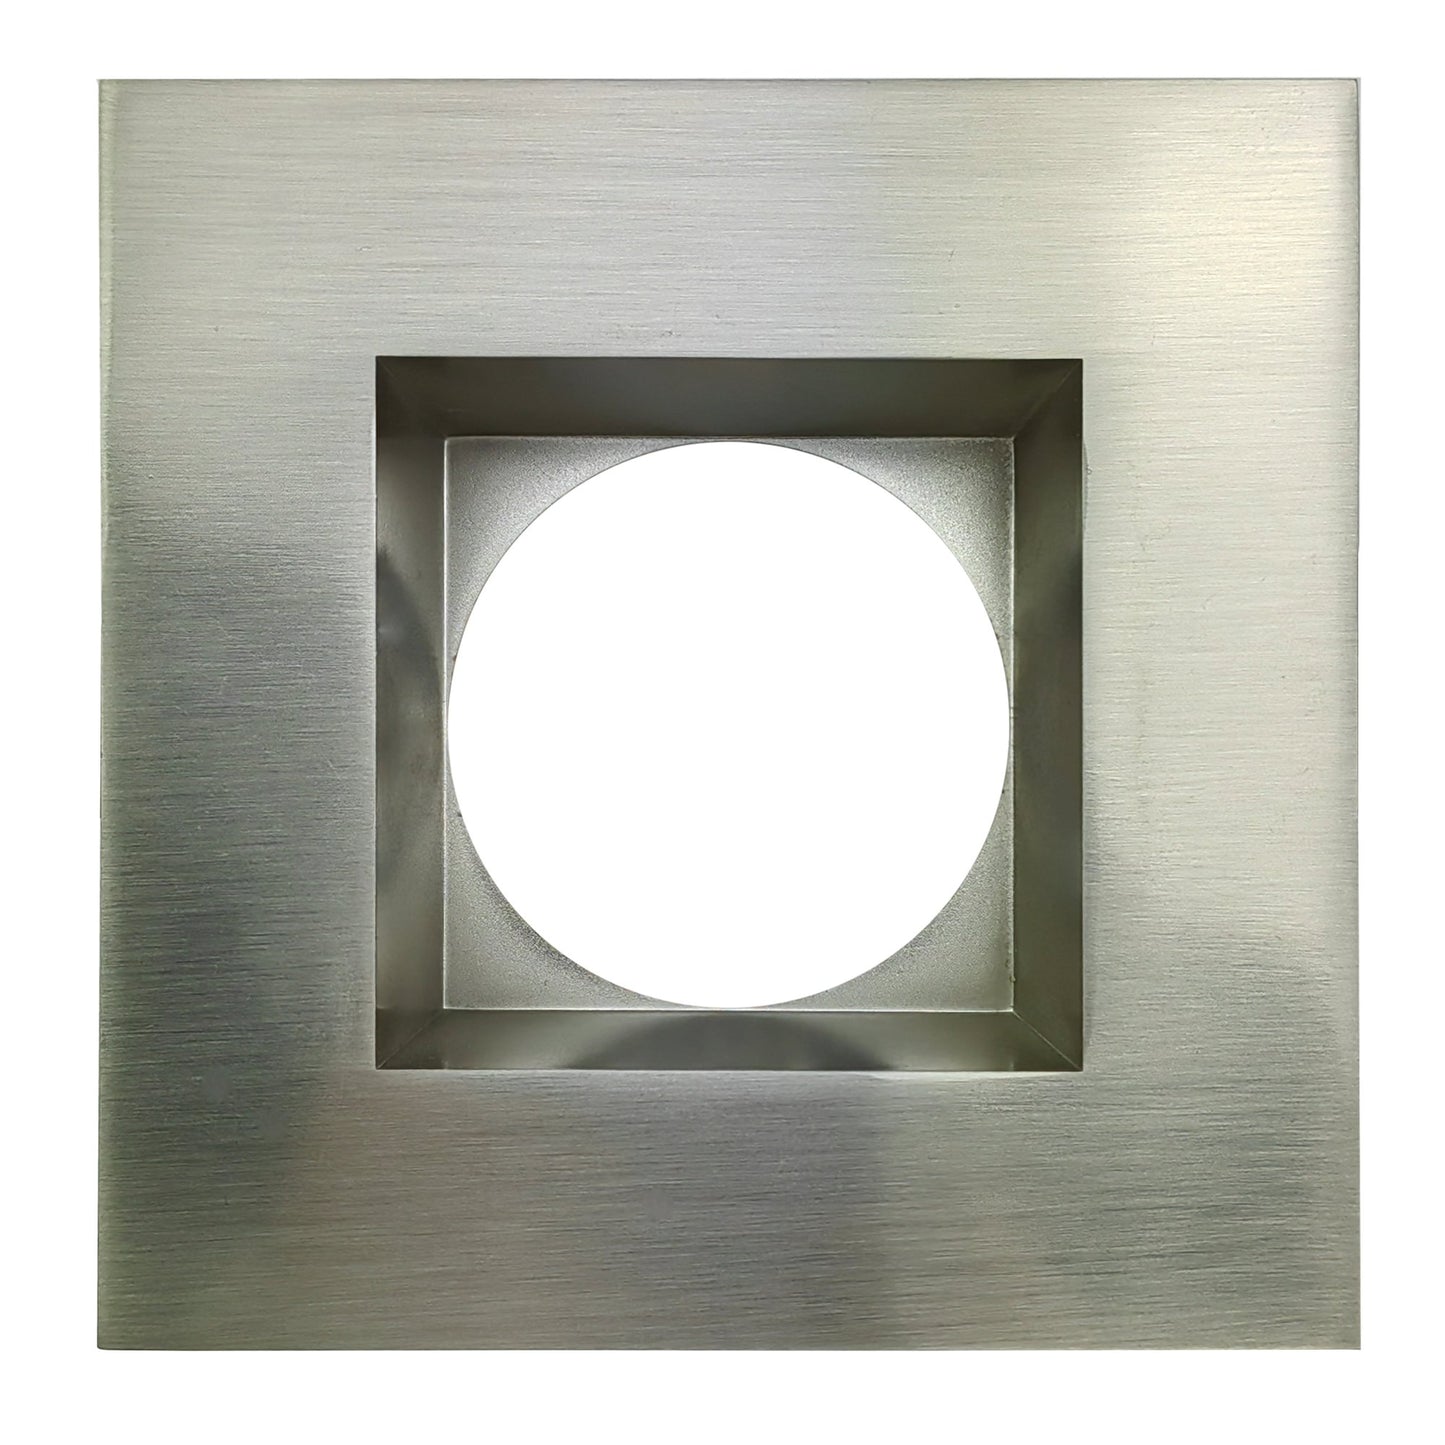 GDL-G10224Goodlite Changeable Trim for Aster 4" 15W/32W Luminaire